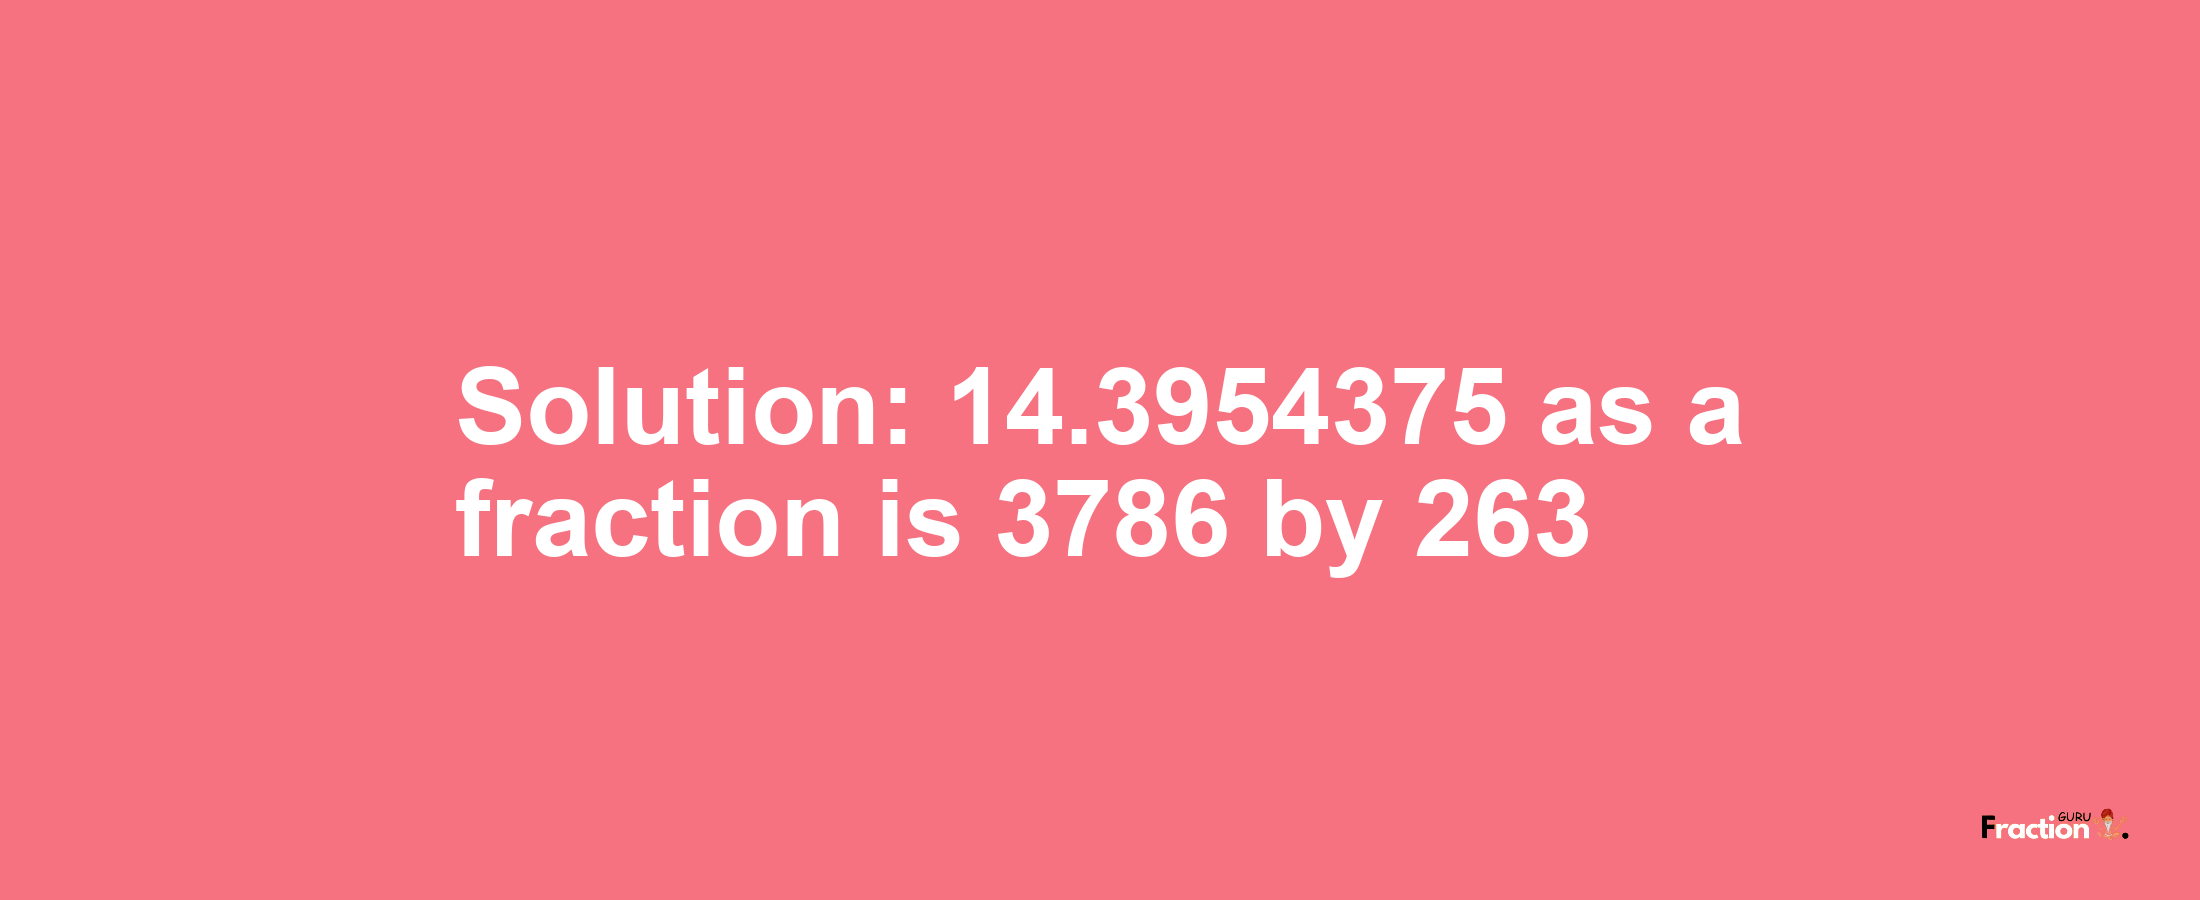 Solution:14.3954375 as a fraction is 3786/263